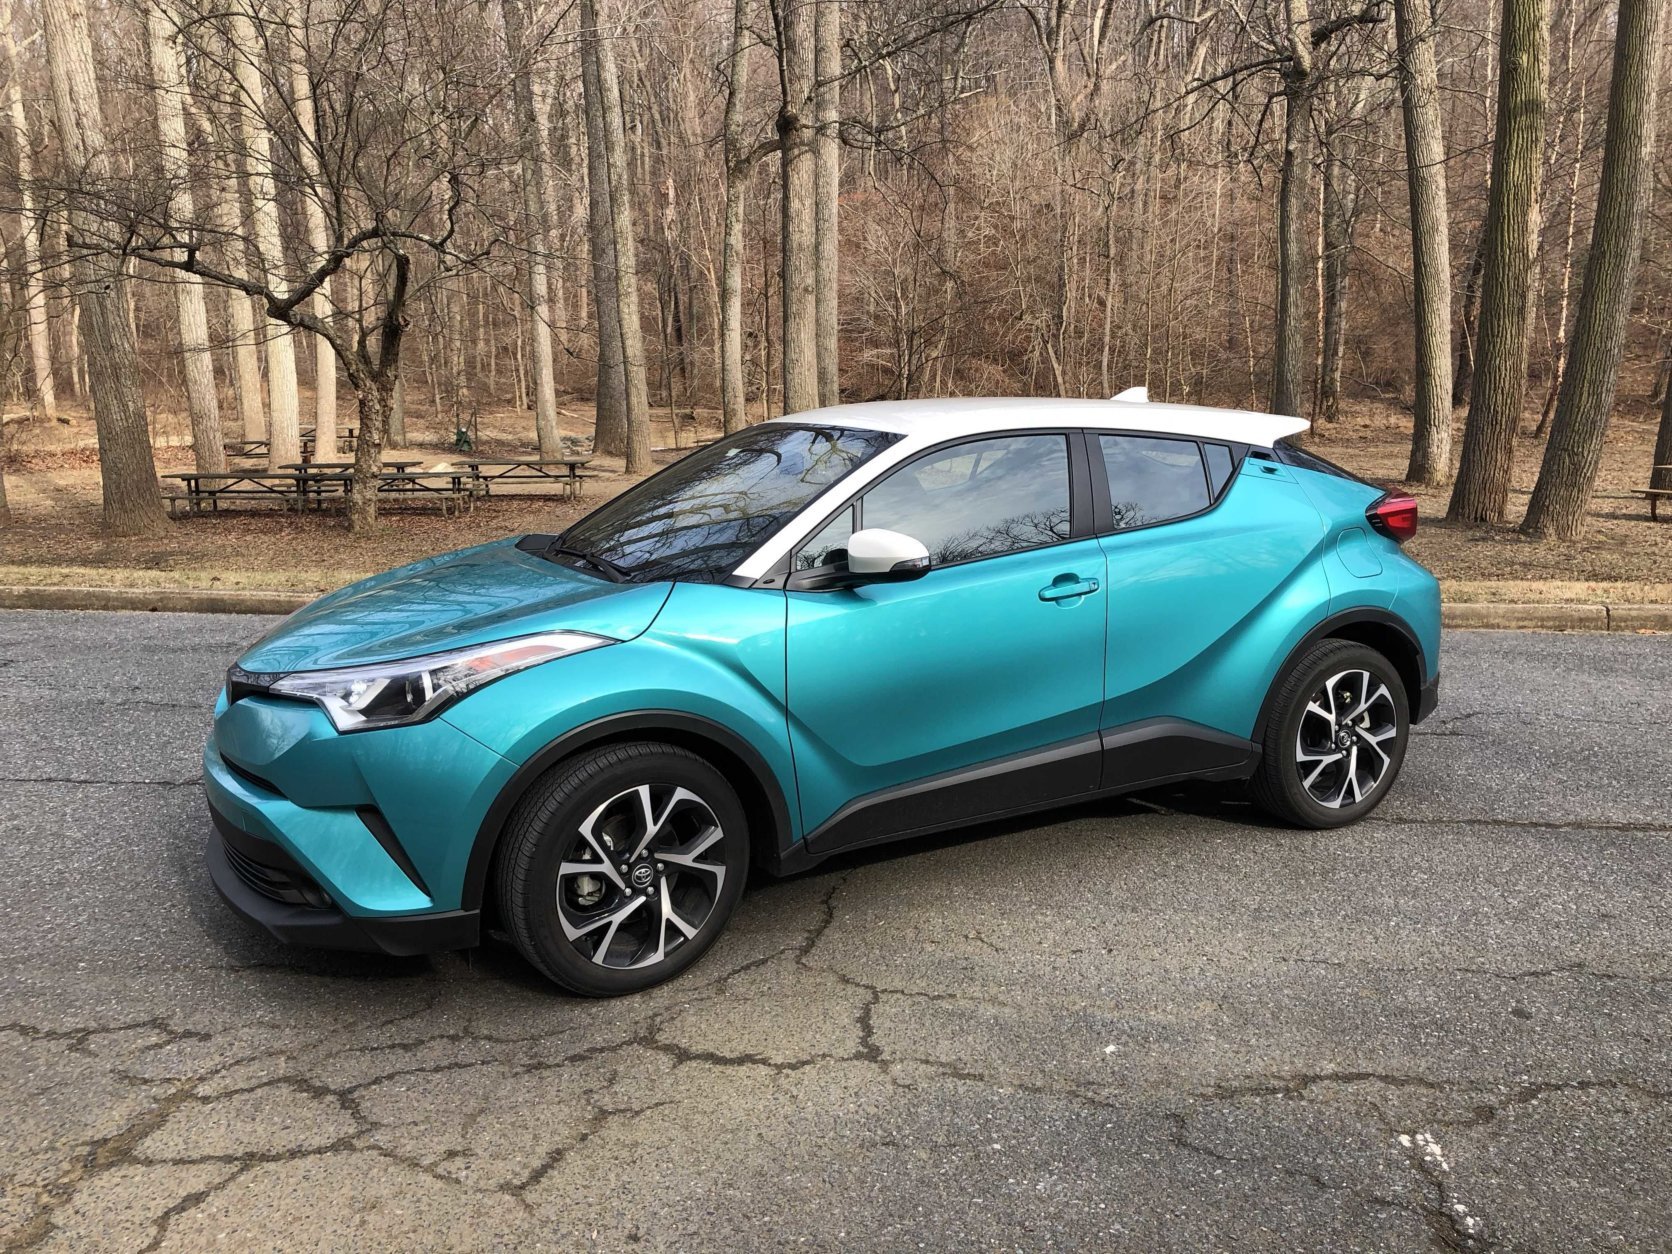 Car Review: Toyota's new subcompact crossover high on style, light on power  - WTOP News